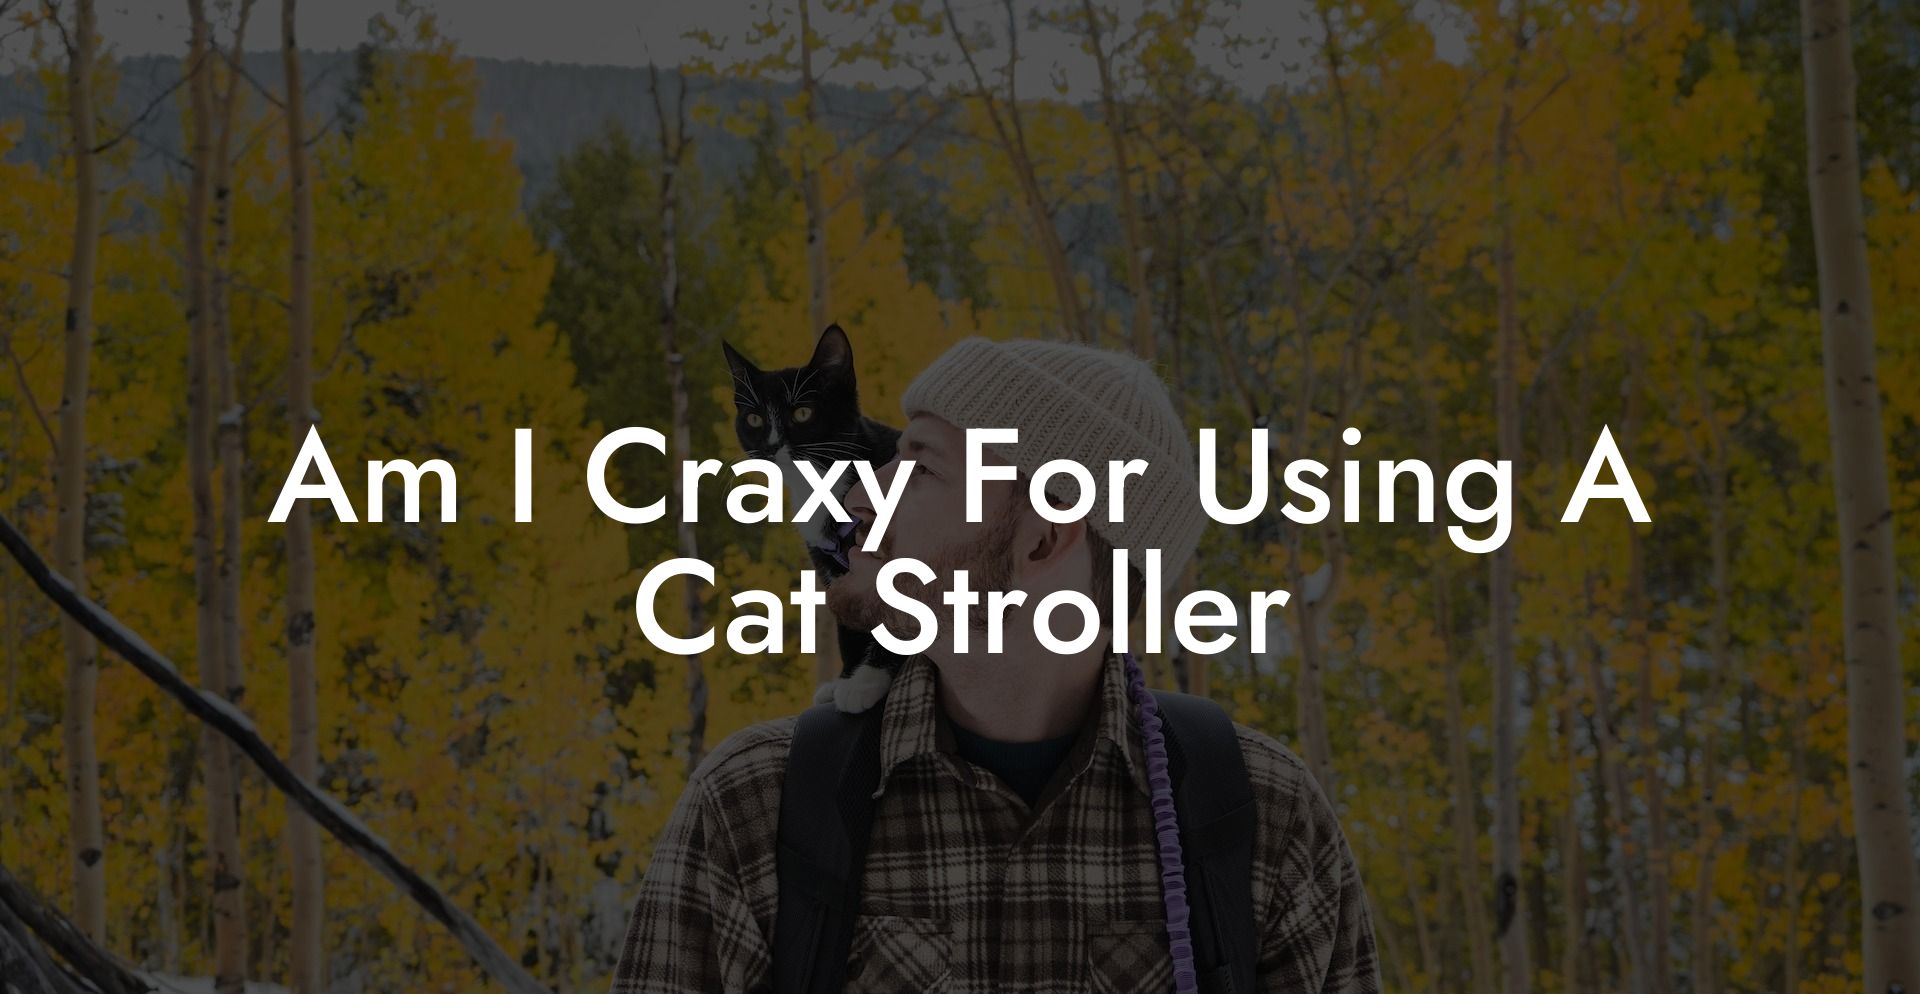 Am I Craxy For Using A Cat Stroller